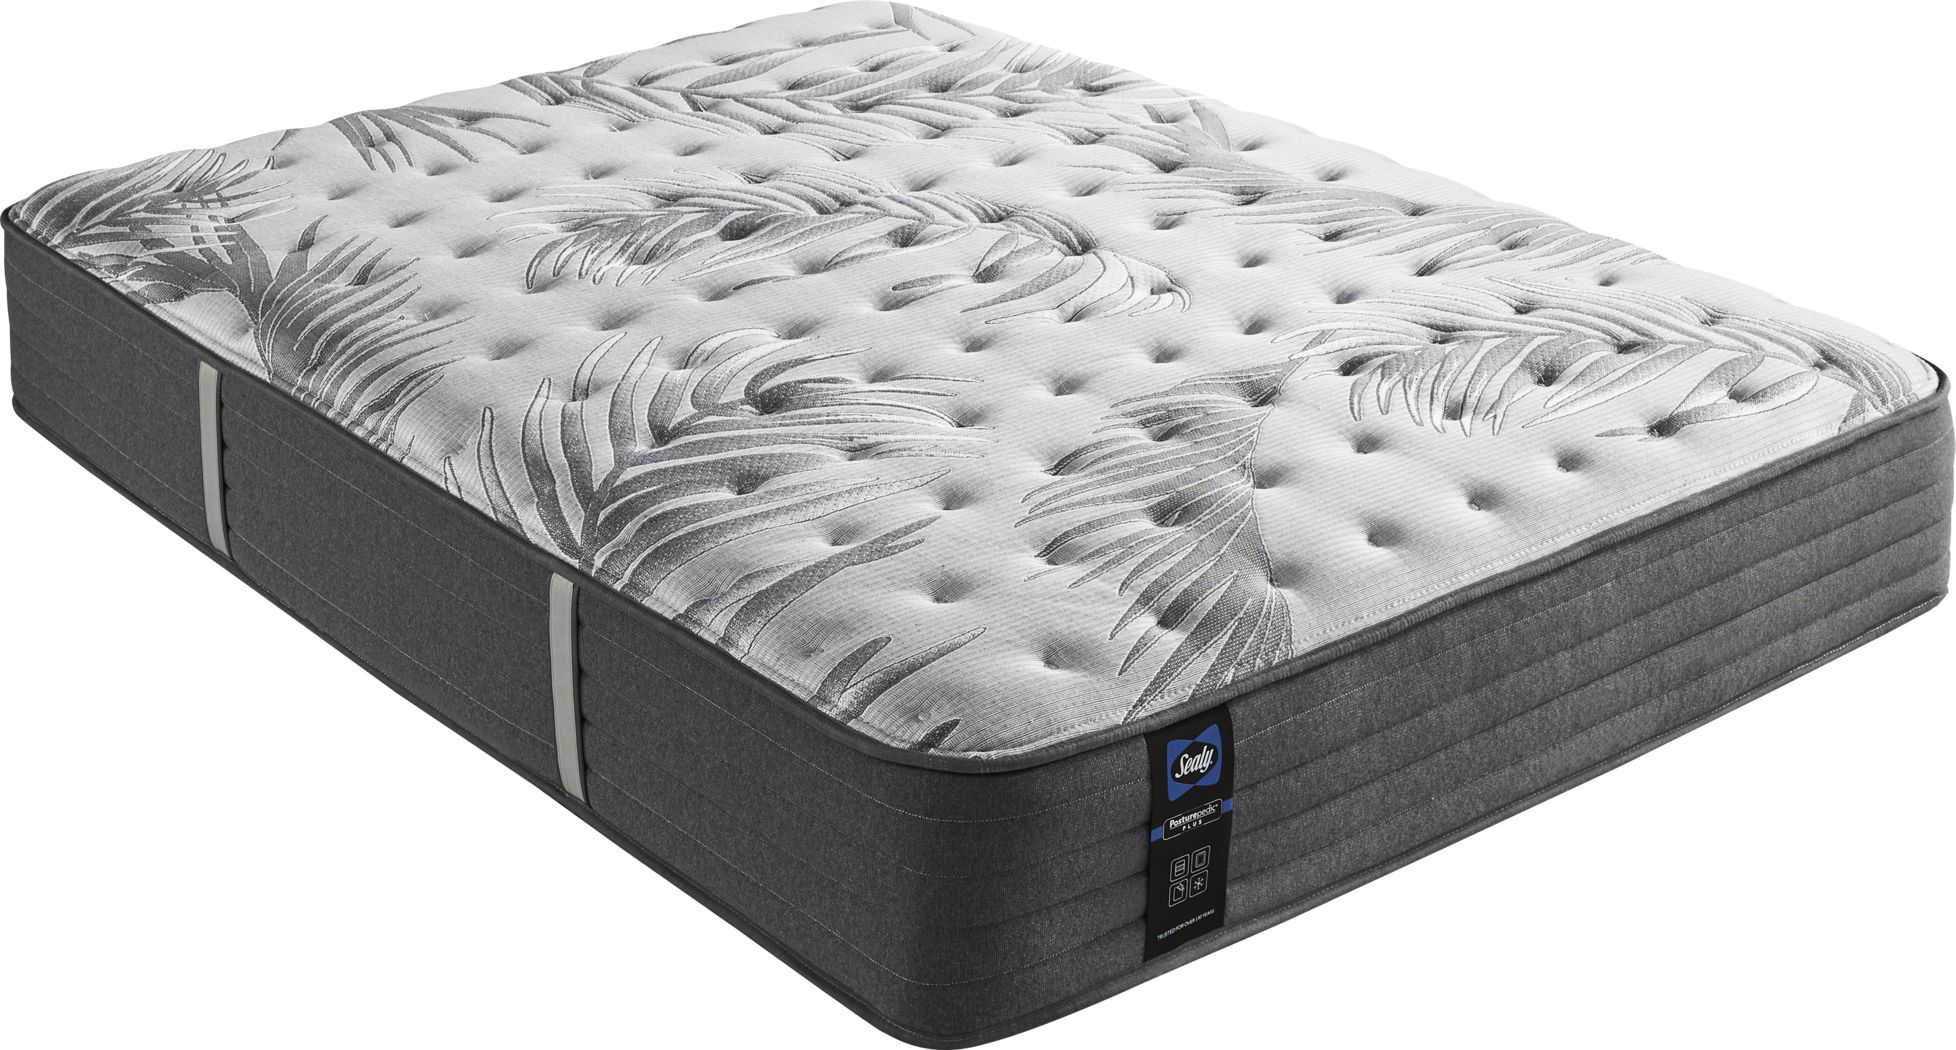 support for sealy mattress queen size